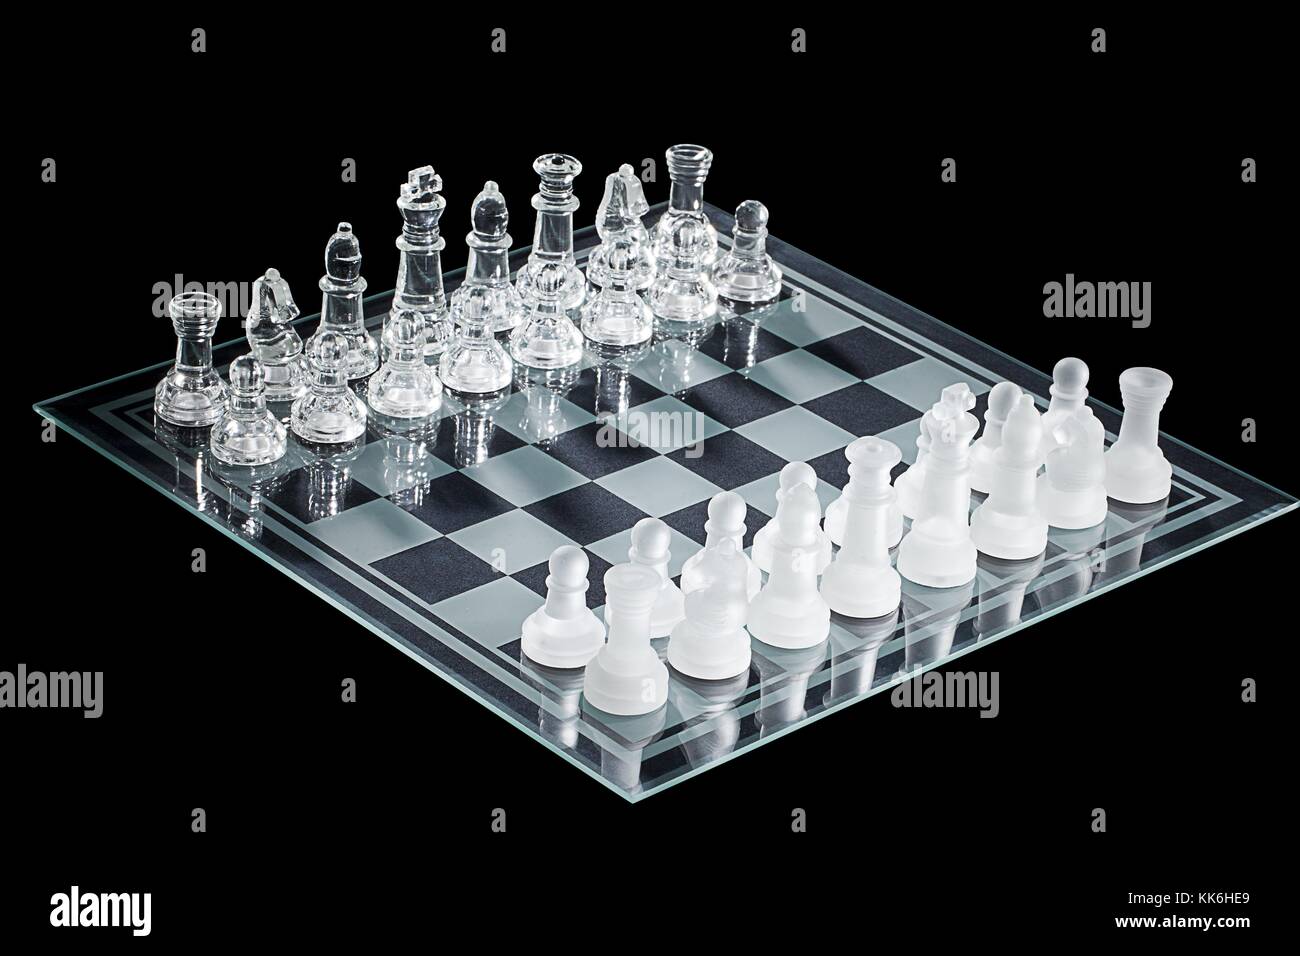 image of chess board Stock Photo